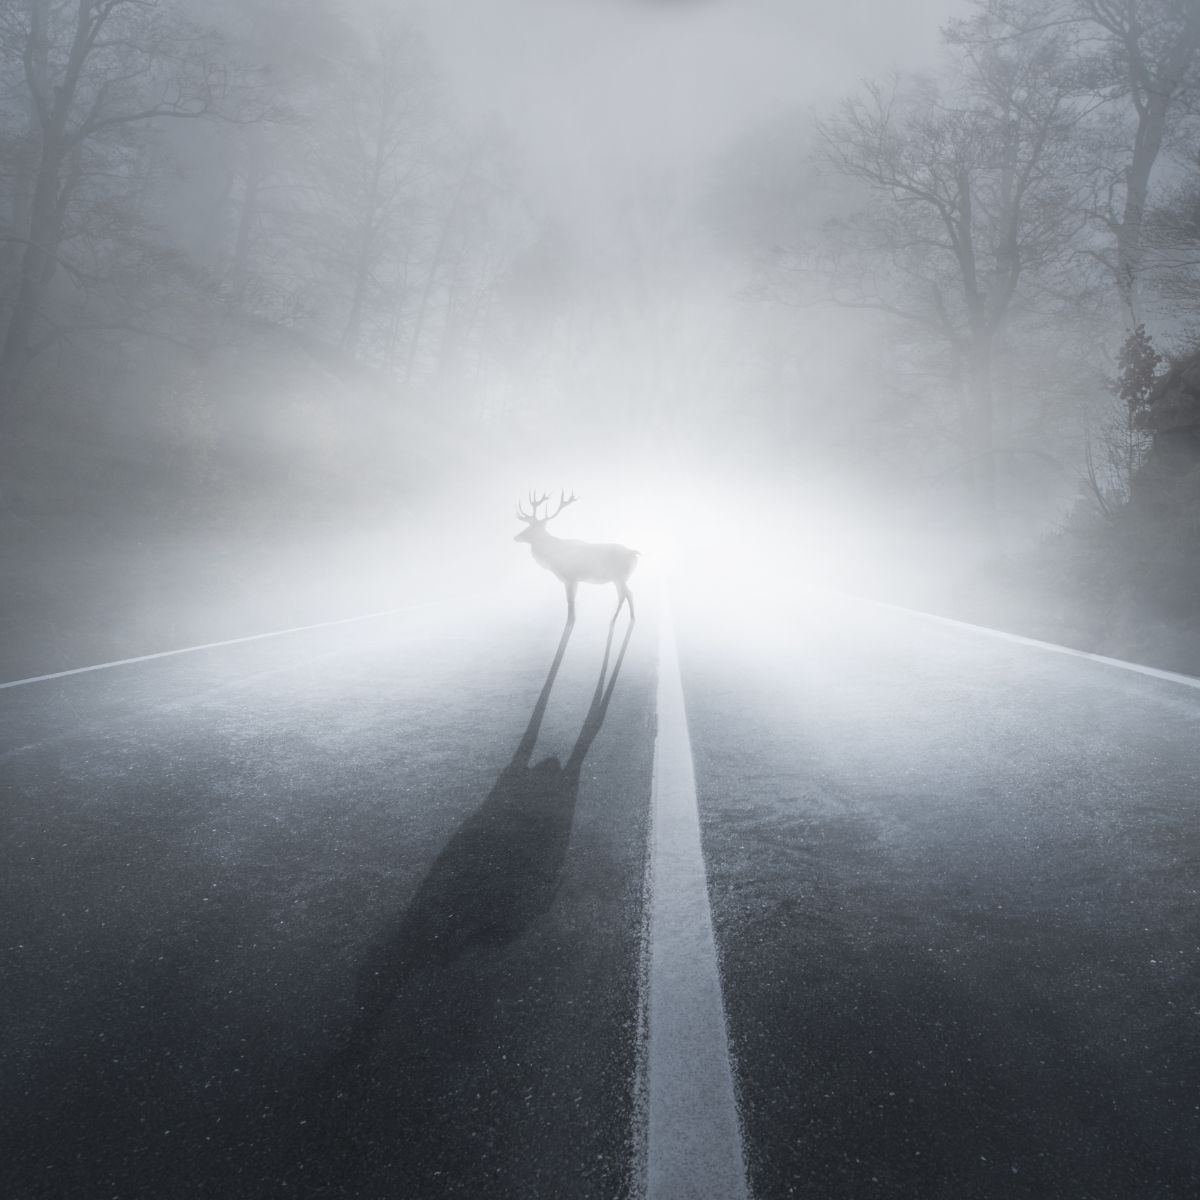 what does seeing a deer symbolize